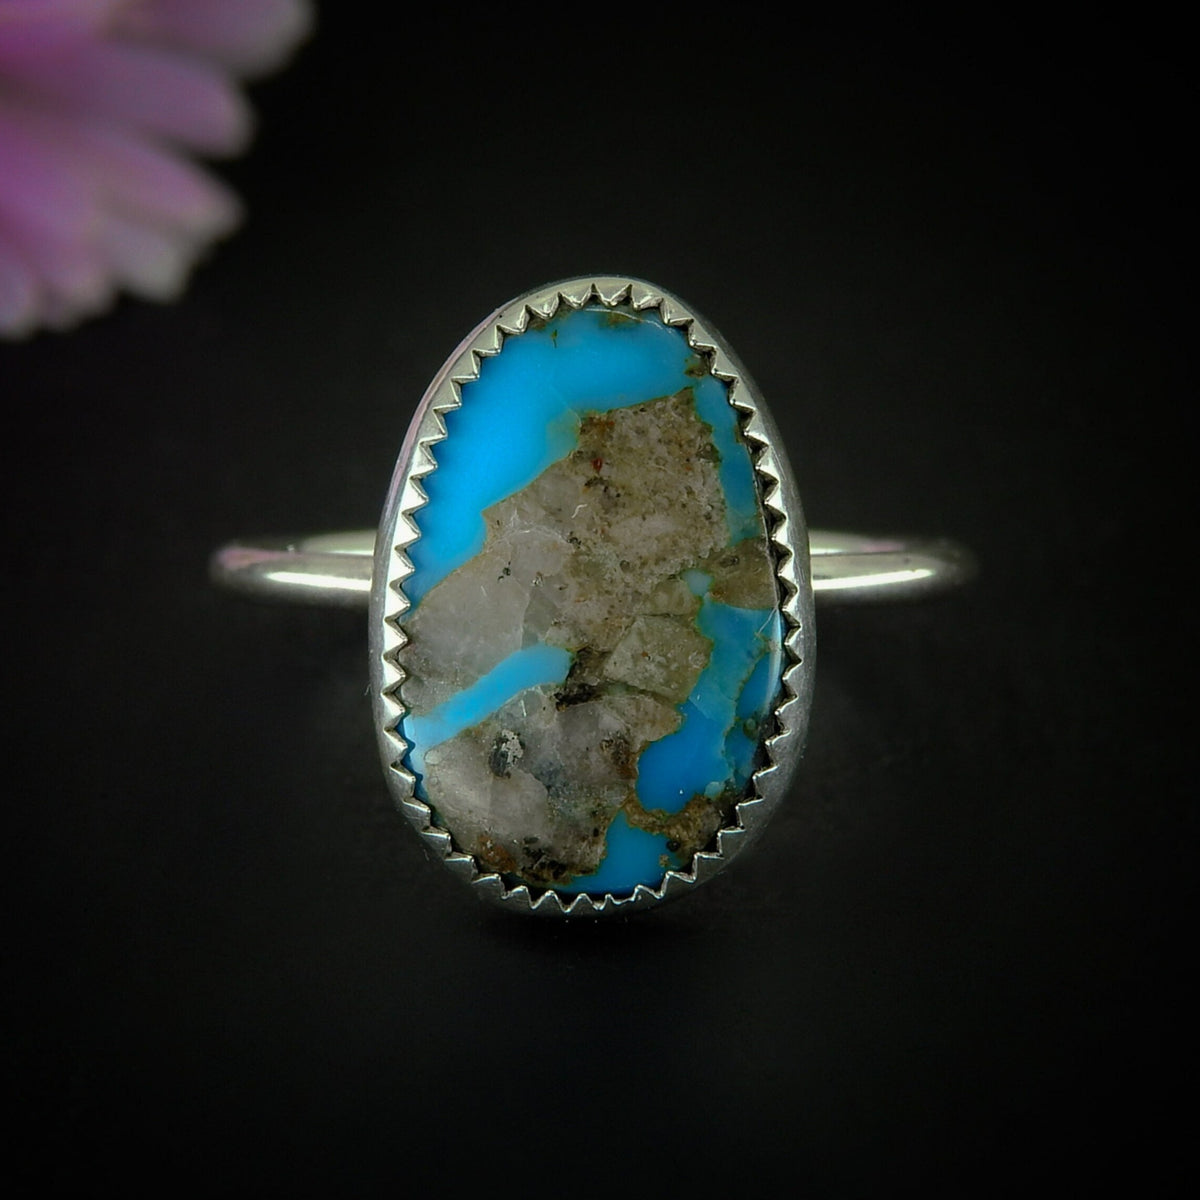 Kingman Turquoise Ring - Size 9 1/4 - Sterling Silver - Blue Turquoise Jewellery - Genuine Turquoise Statement Ring - Large Turquoise Matrix